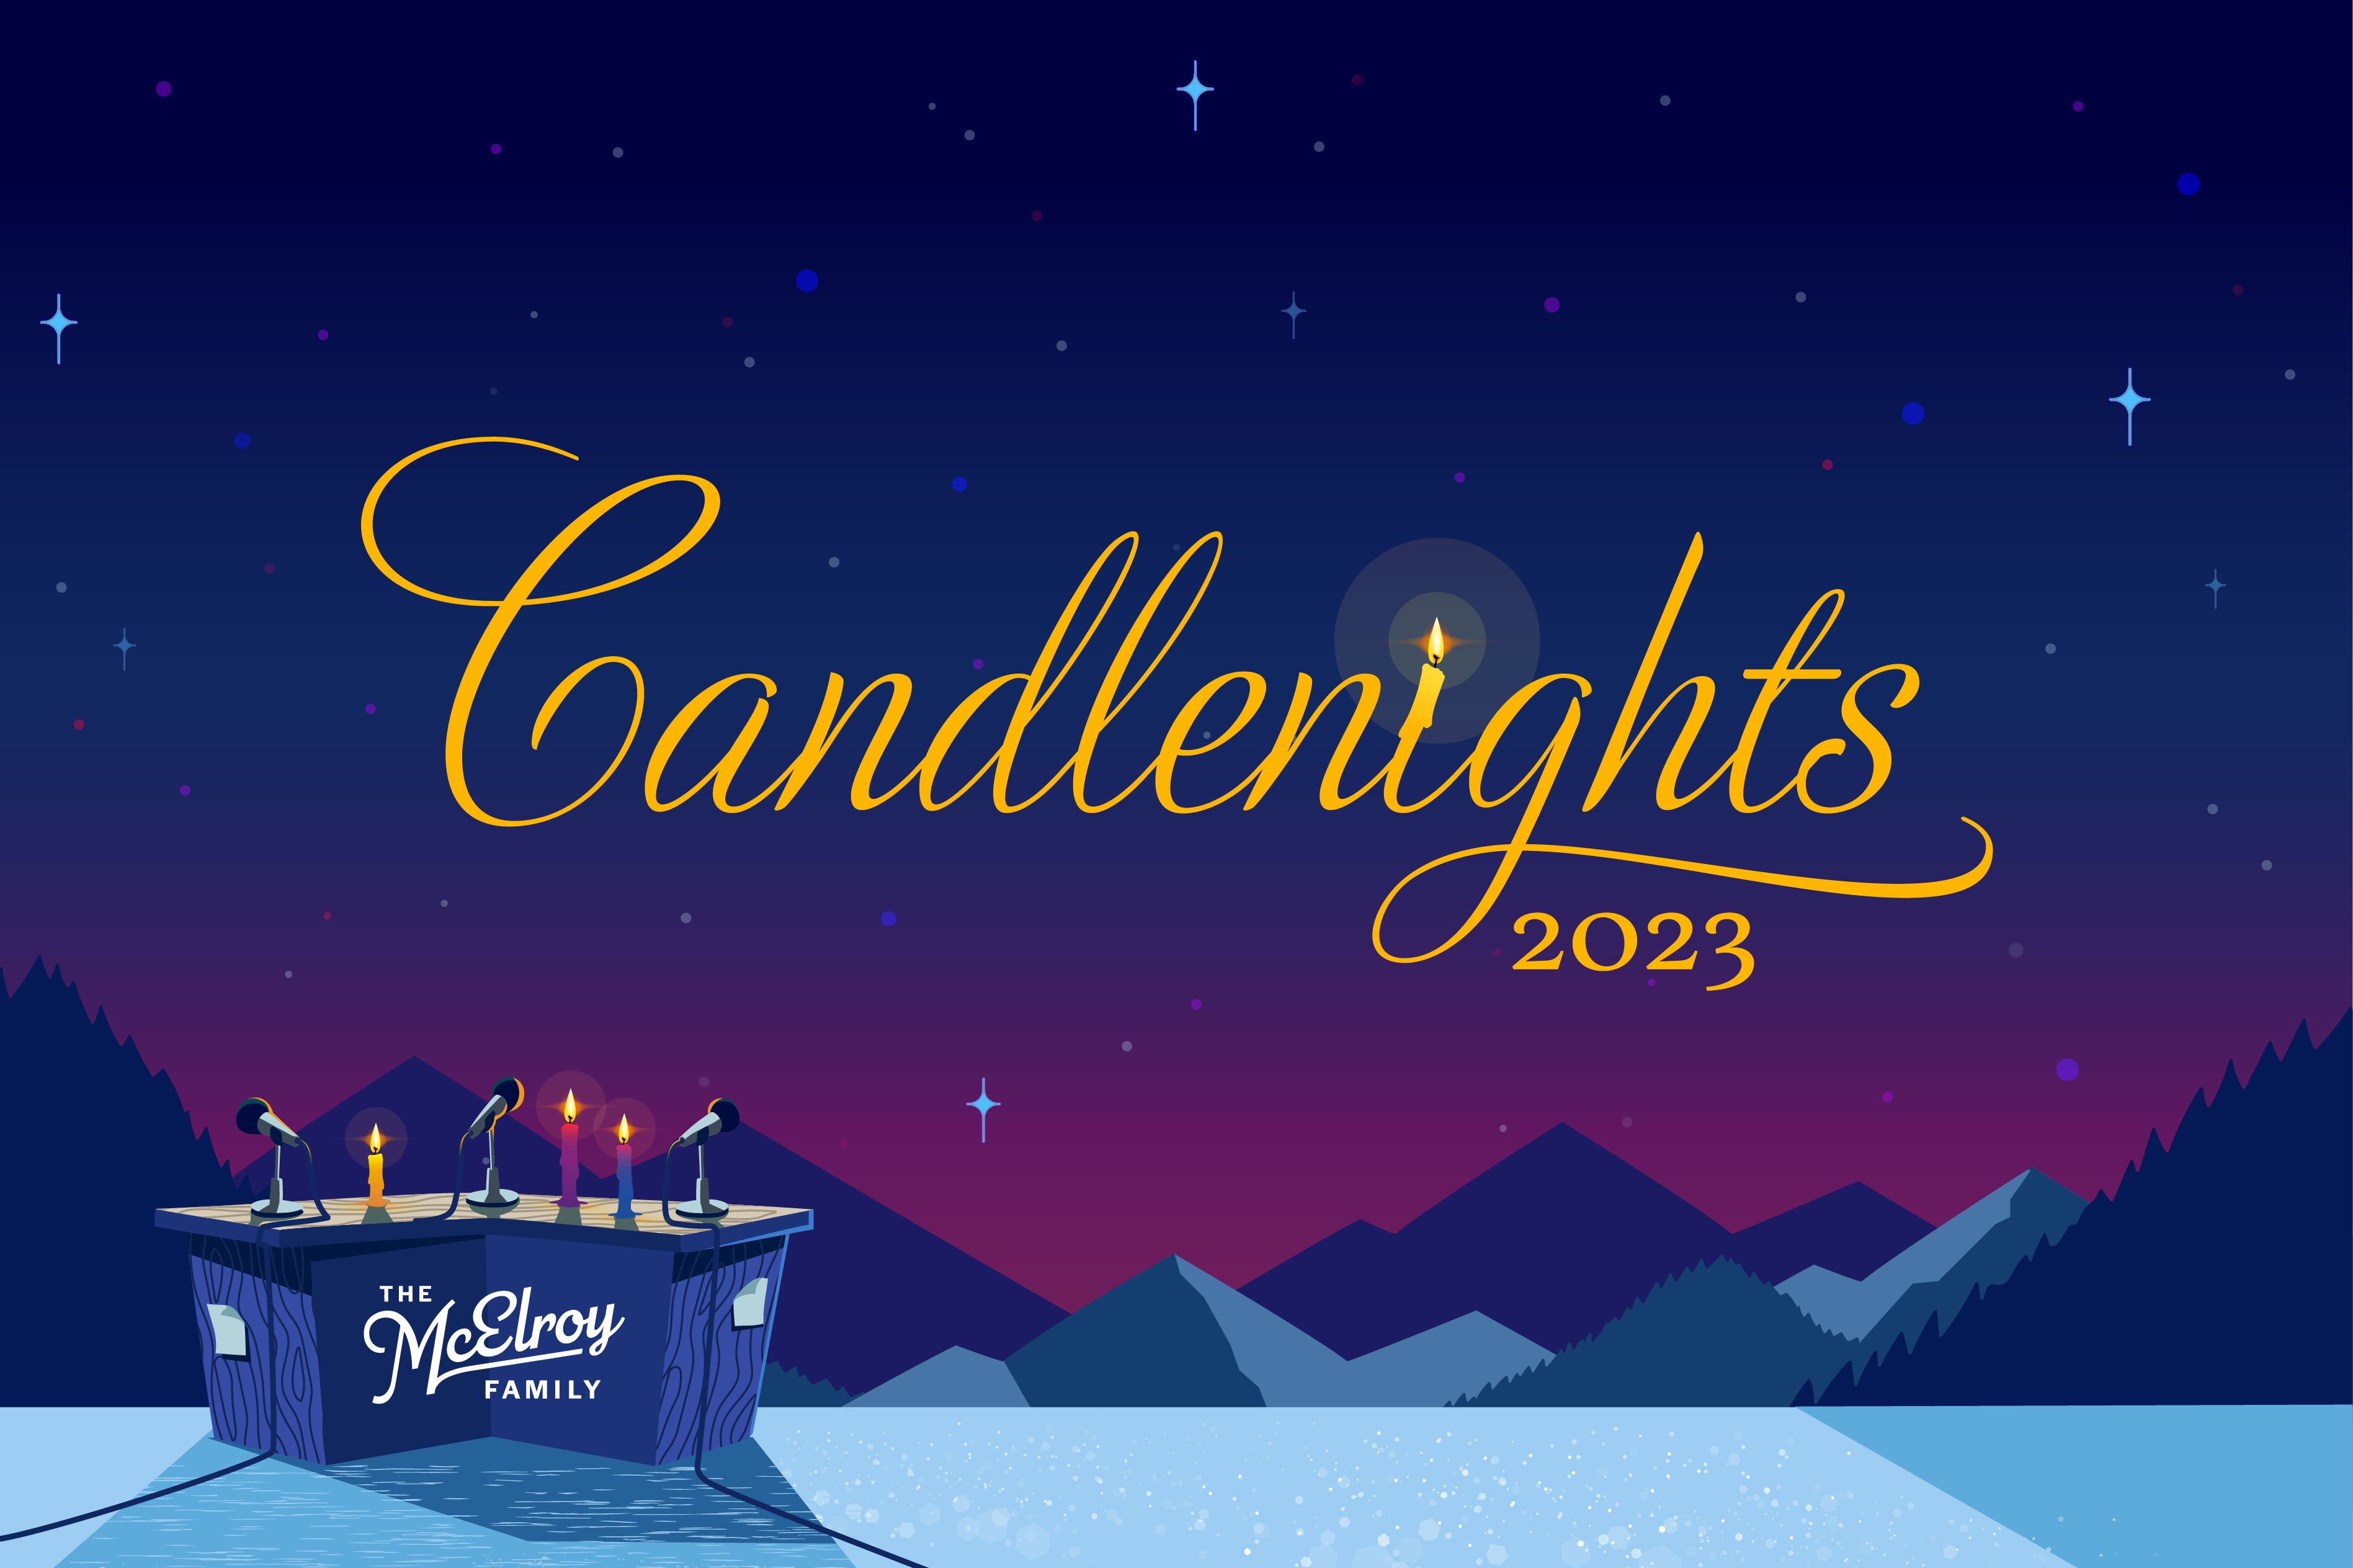 Gold script text reads: “Candlenights 2023” Text is superimposed on an illustrated background of a blue and purple twilight sky over blue mountains.